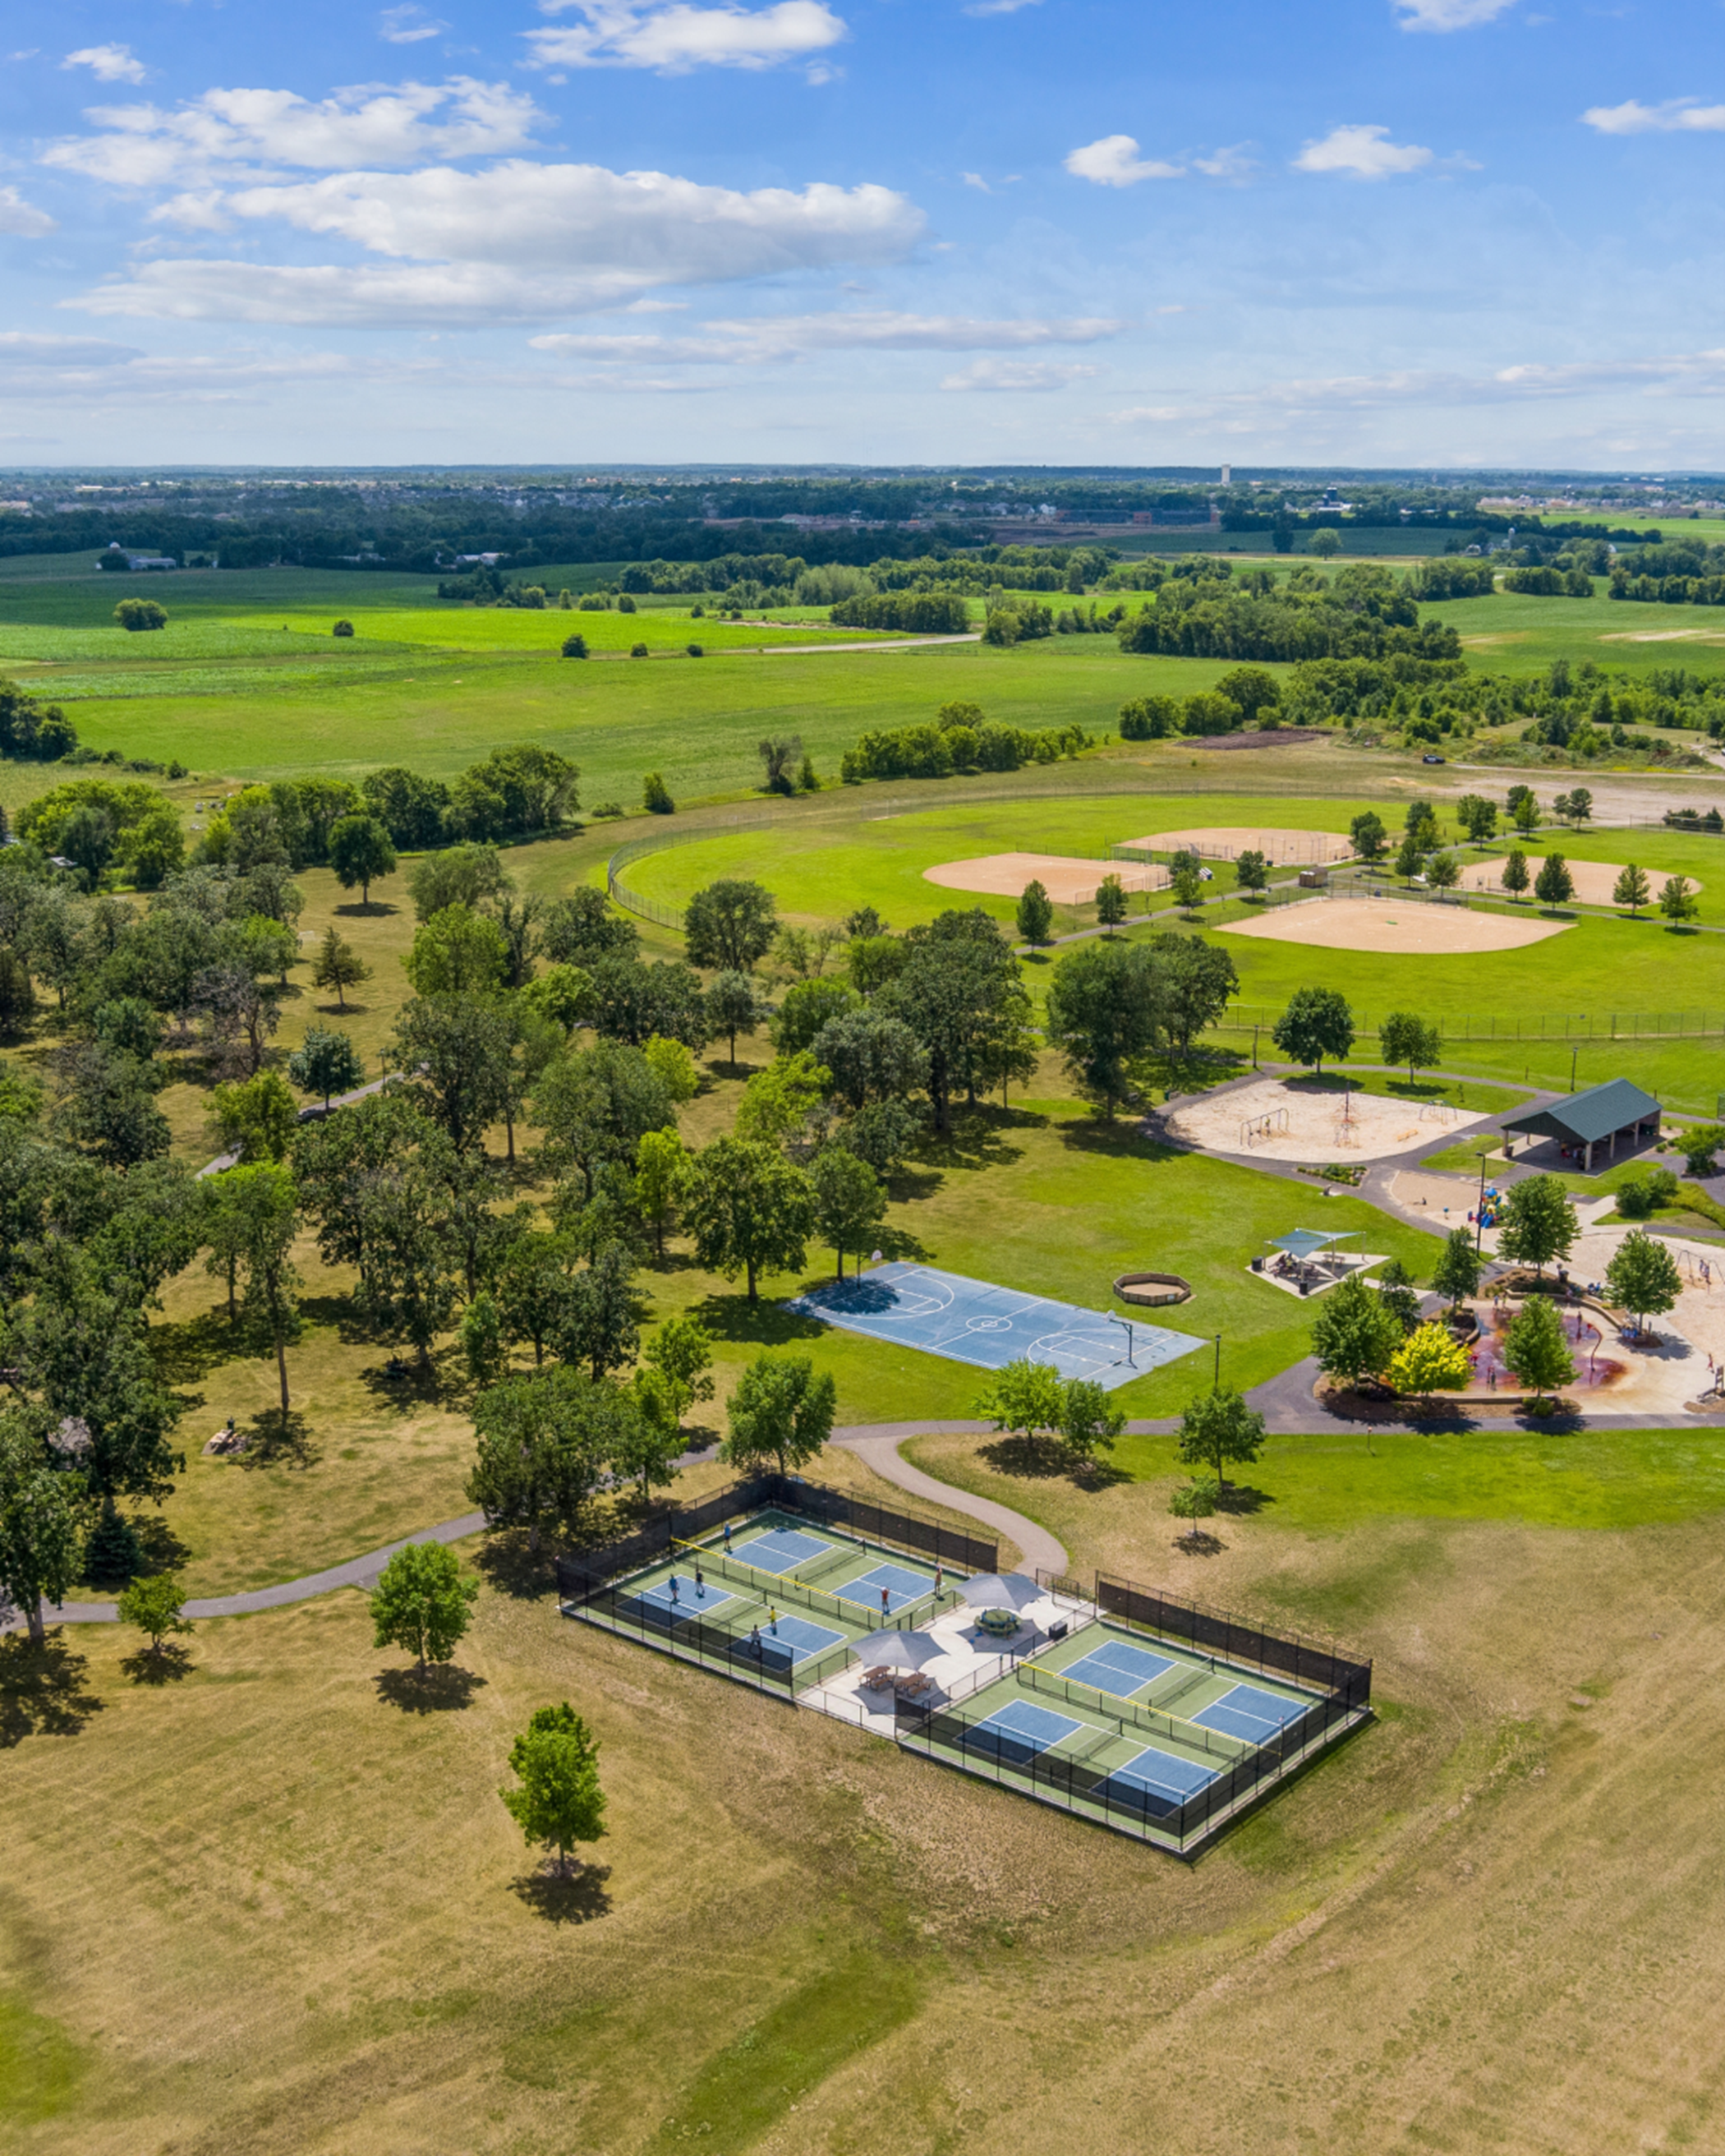 park aerial with sports courts